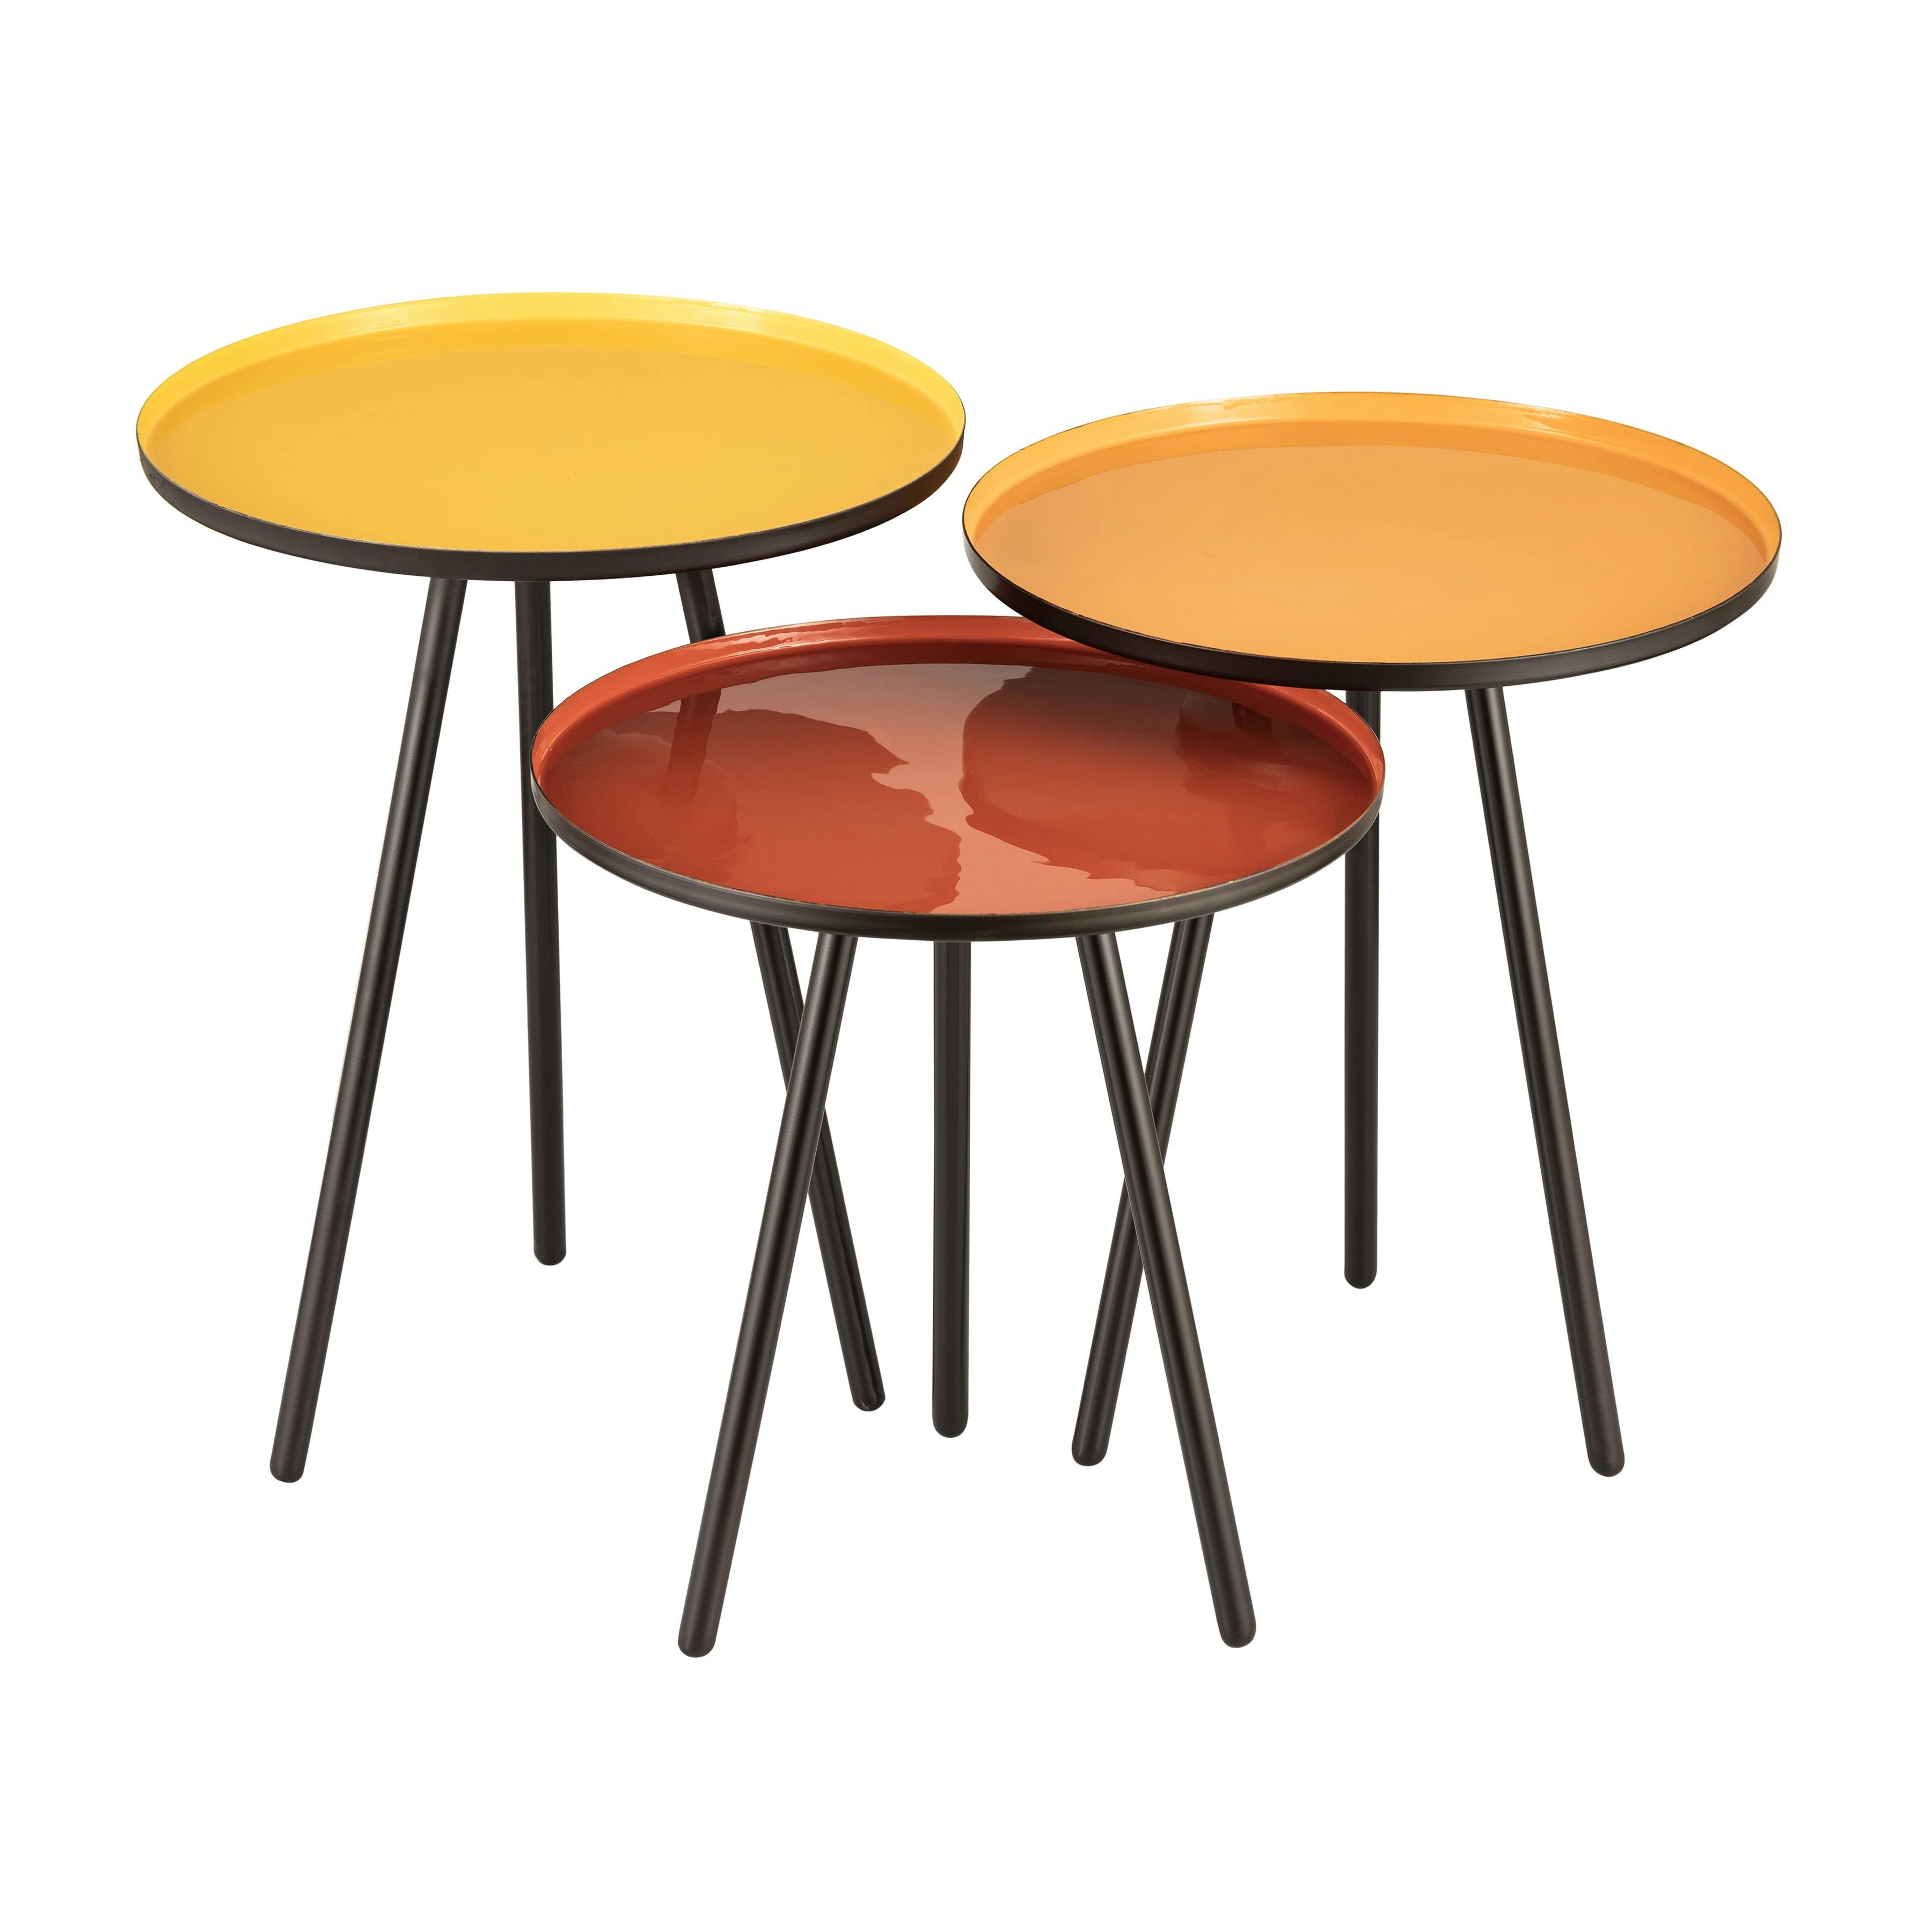 Modern Trio Gregg Round Metal & Glass Accent Tables in Bold Enamel